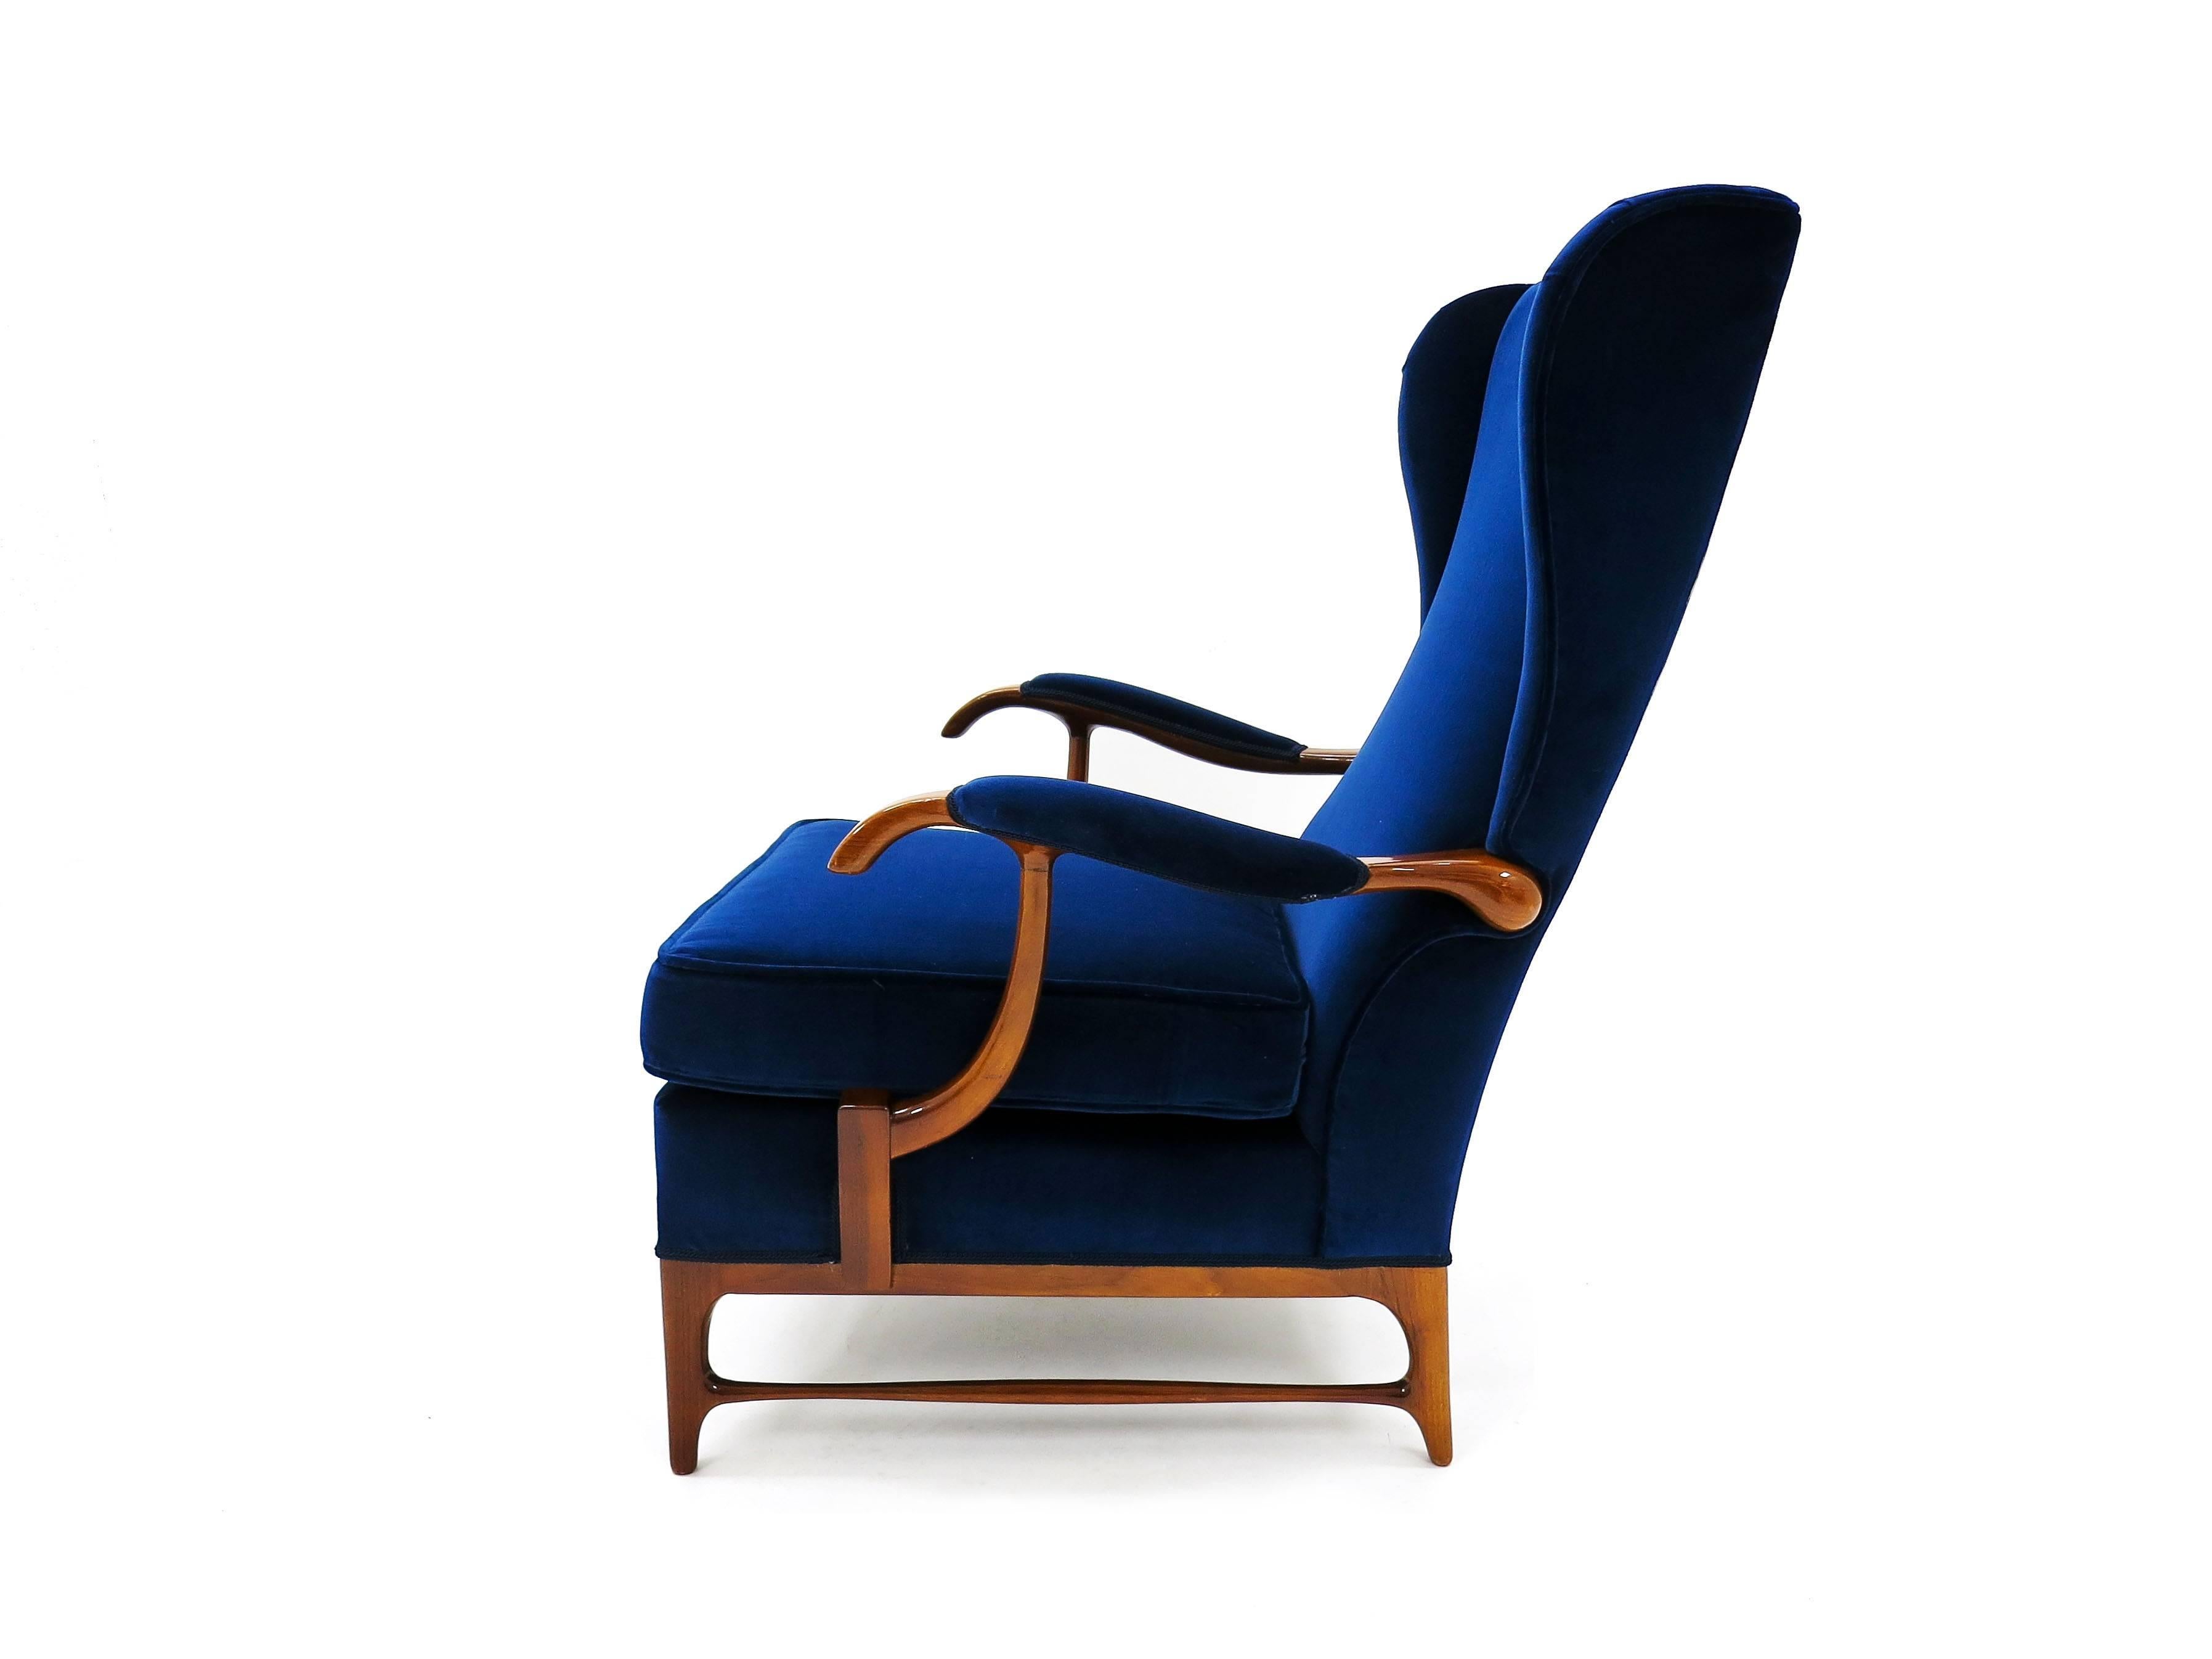 A Mid-Century wingback armchair of small proportions designed by Paolo Buffa in the 1950s. Walnut frame reupholstered with a royal blue velvet and backed with a 1950s inspired geometric design fabric, all in an excellent original condition.

A